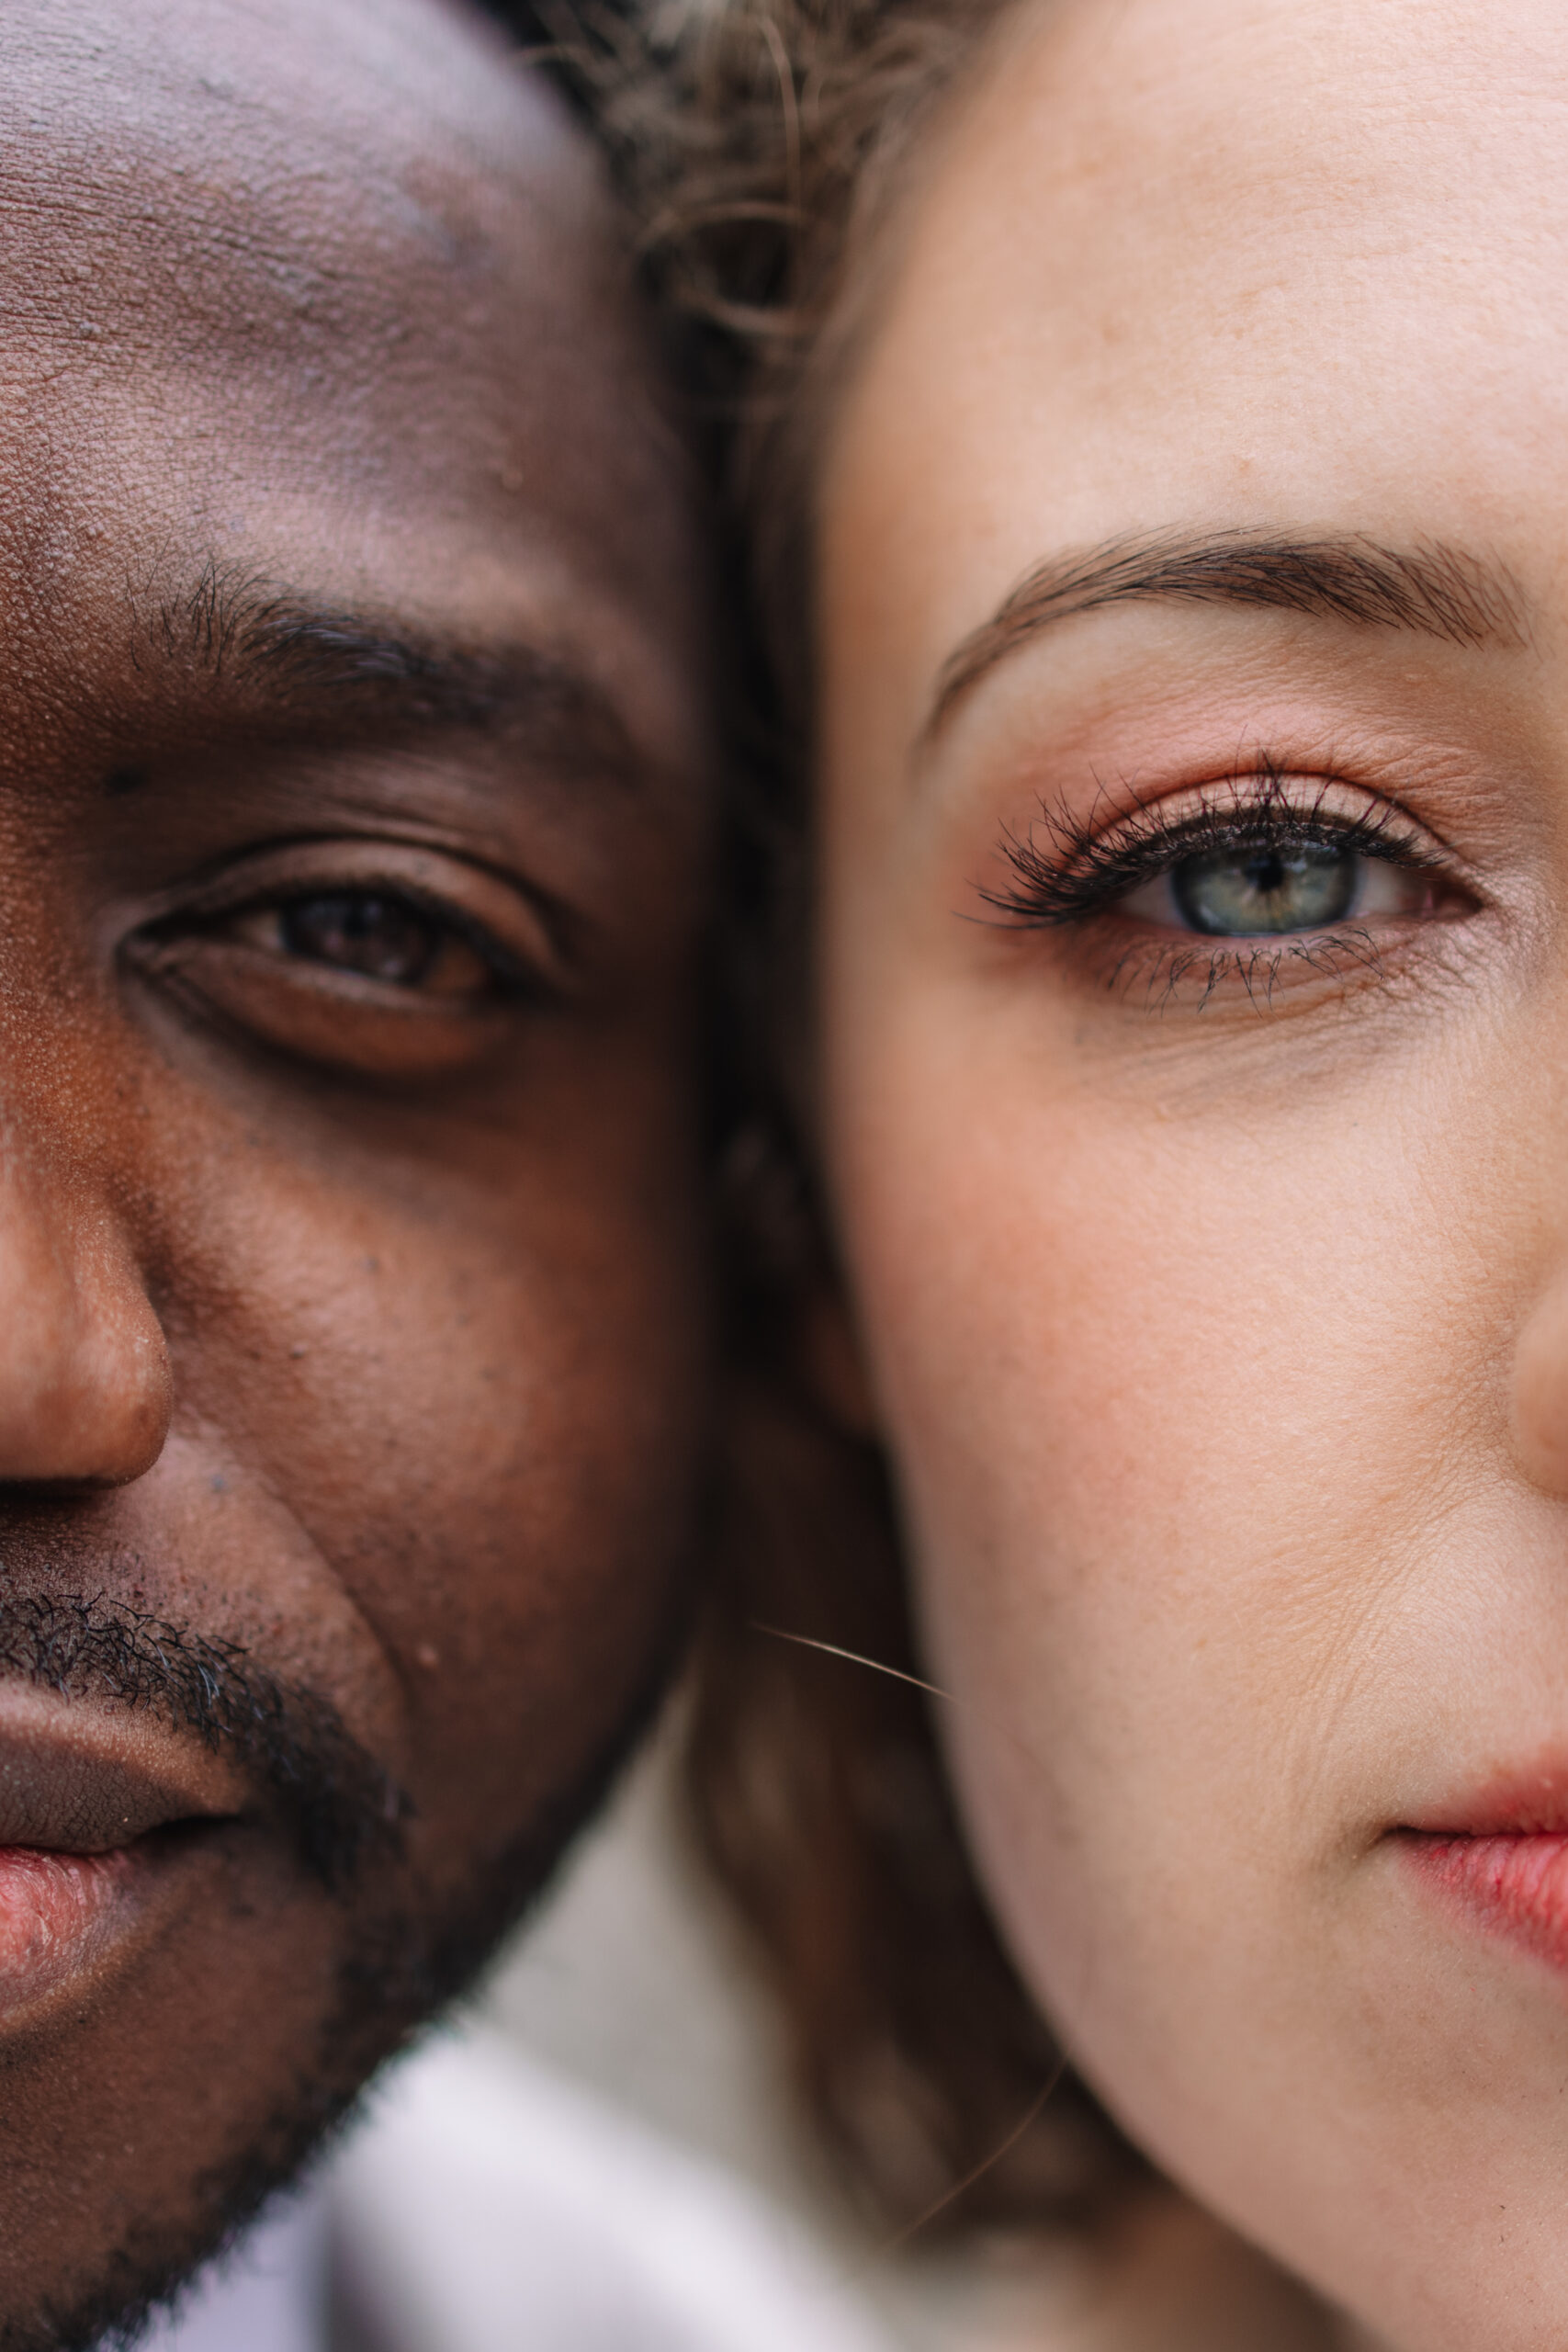 Close-up of the faces of two people, focusing on the left side of the man's face and the right side of the woman's face. Both are looking straight ahead.